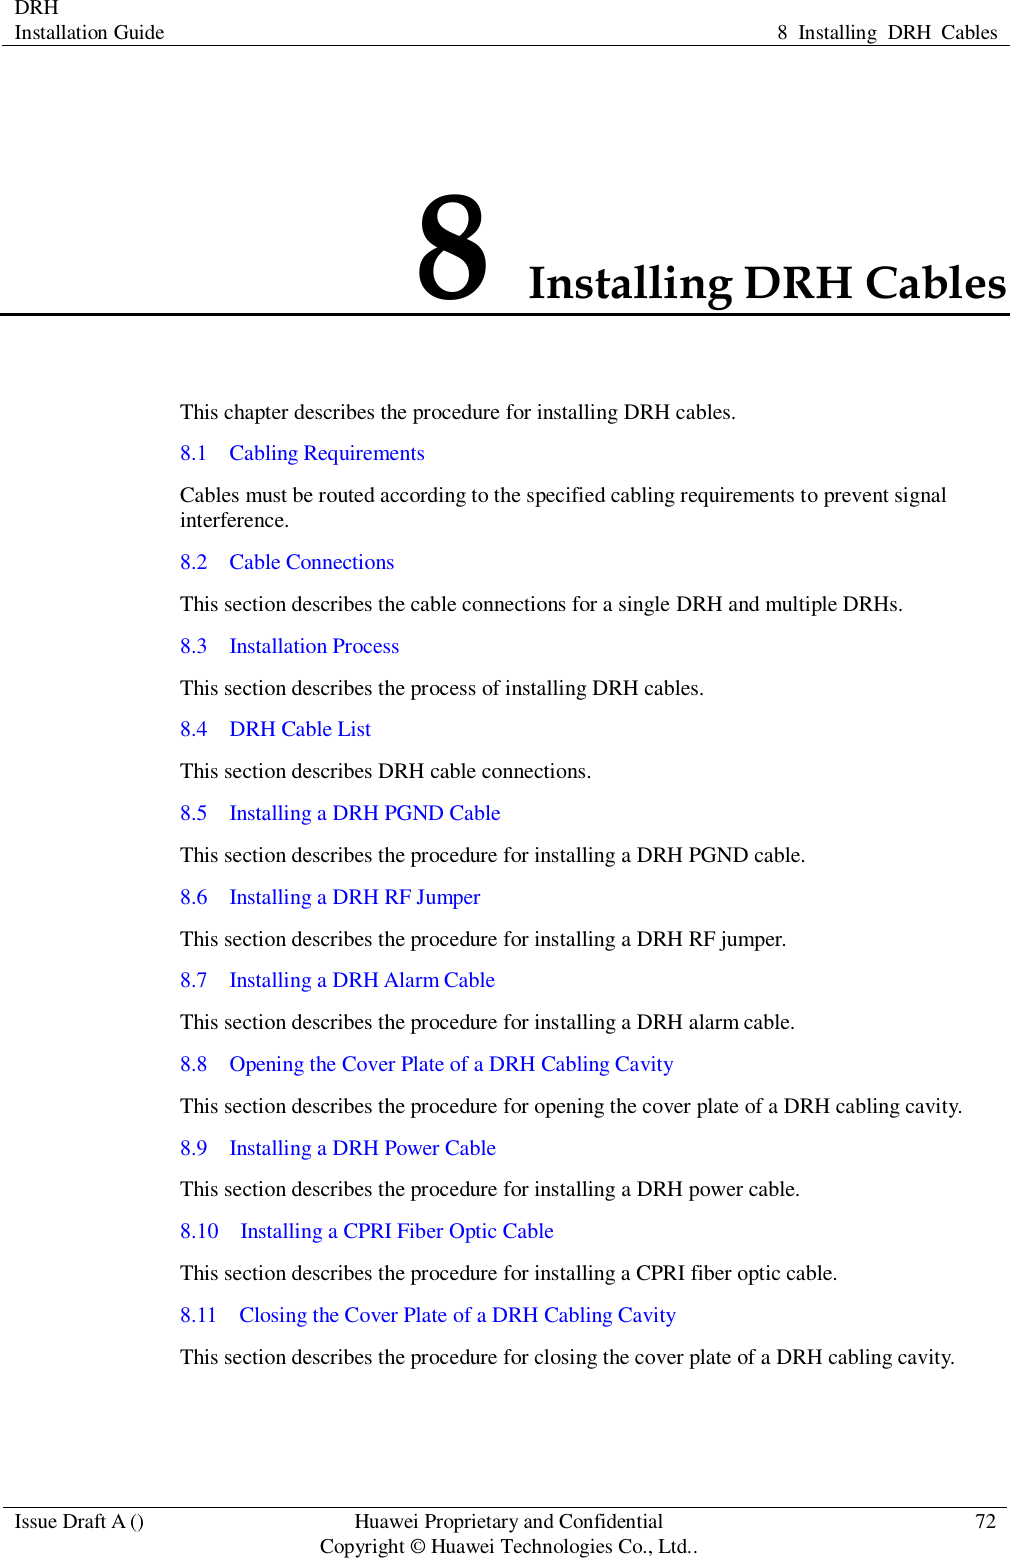 DRH   Installation Guide 8  Installing  DRH  Cables  Issue Draft A () Huawei Proprietary and Confidential                                     Copyright © Huawei Technologies Co., Ltd.. 72  8 Installing DRH Cables This chapter describes the procedure for installing DRH cables.   8.1    Cabling Requirements Cables must be routed according to the specified cabling requirements to prevent signal interference. 8.2    Cable Connections This section describes the cable connections for a single DRH and multiple DRHs. 8.3    Installation Process This section describes the process of installing DRH cables. 8.4    DRH Cable List This section describes DRH cable connections. 8.5    Installing a DRH PGND Cable This section describes the procedure for installing a DRH PGND cable. 8.6    Installing a DRH RF Jumper This section describes the procedure for installing a DRH RF jumper. 8.7  Installing a DRH Alarm Cable This section describes the procedure for installing a DRH alarm cable. 8.8  Opening the Cover Plate of a DRH Cabling Cavity This section describes the procedure for opening the cover plate of a DRH cabling cavity. 8.9  Installing a DRH Power Cable This section describes the procedure for installing a DRH power cable. 8.10  Installing a CPRI Fiber Optic Cable This section describes the procedure for installing a CPRI fiber optic cable. 8.11  Closing the Cover Plate of a DRH Cabling Cavity This section describes the procedure for closing the cover plate of a DRH cabling cavity. 